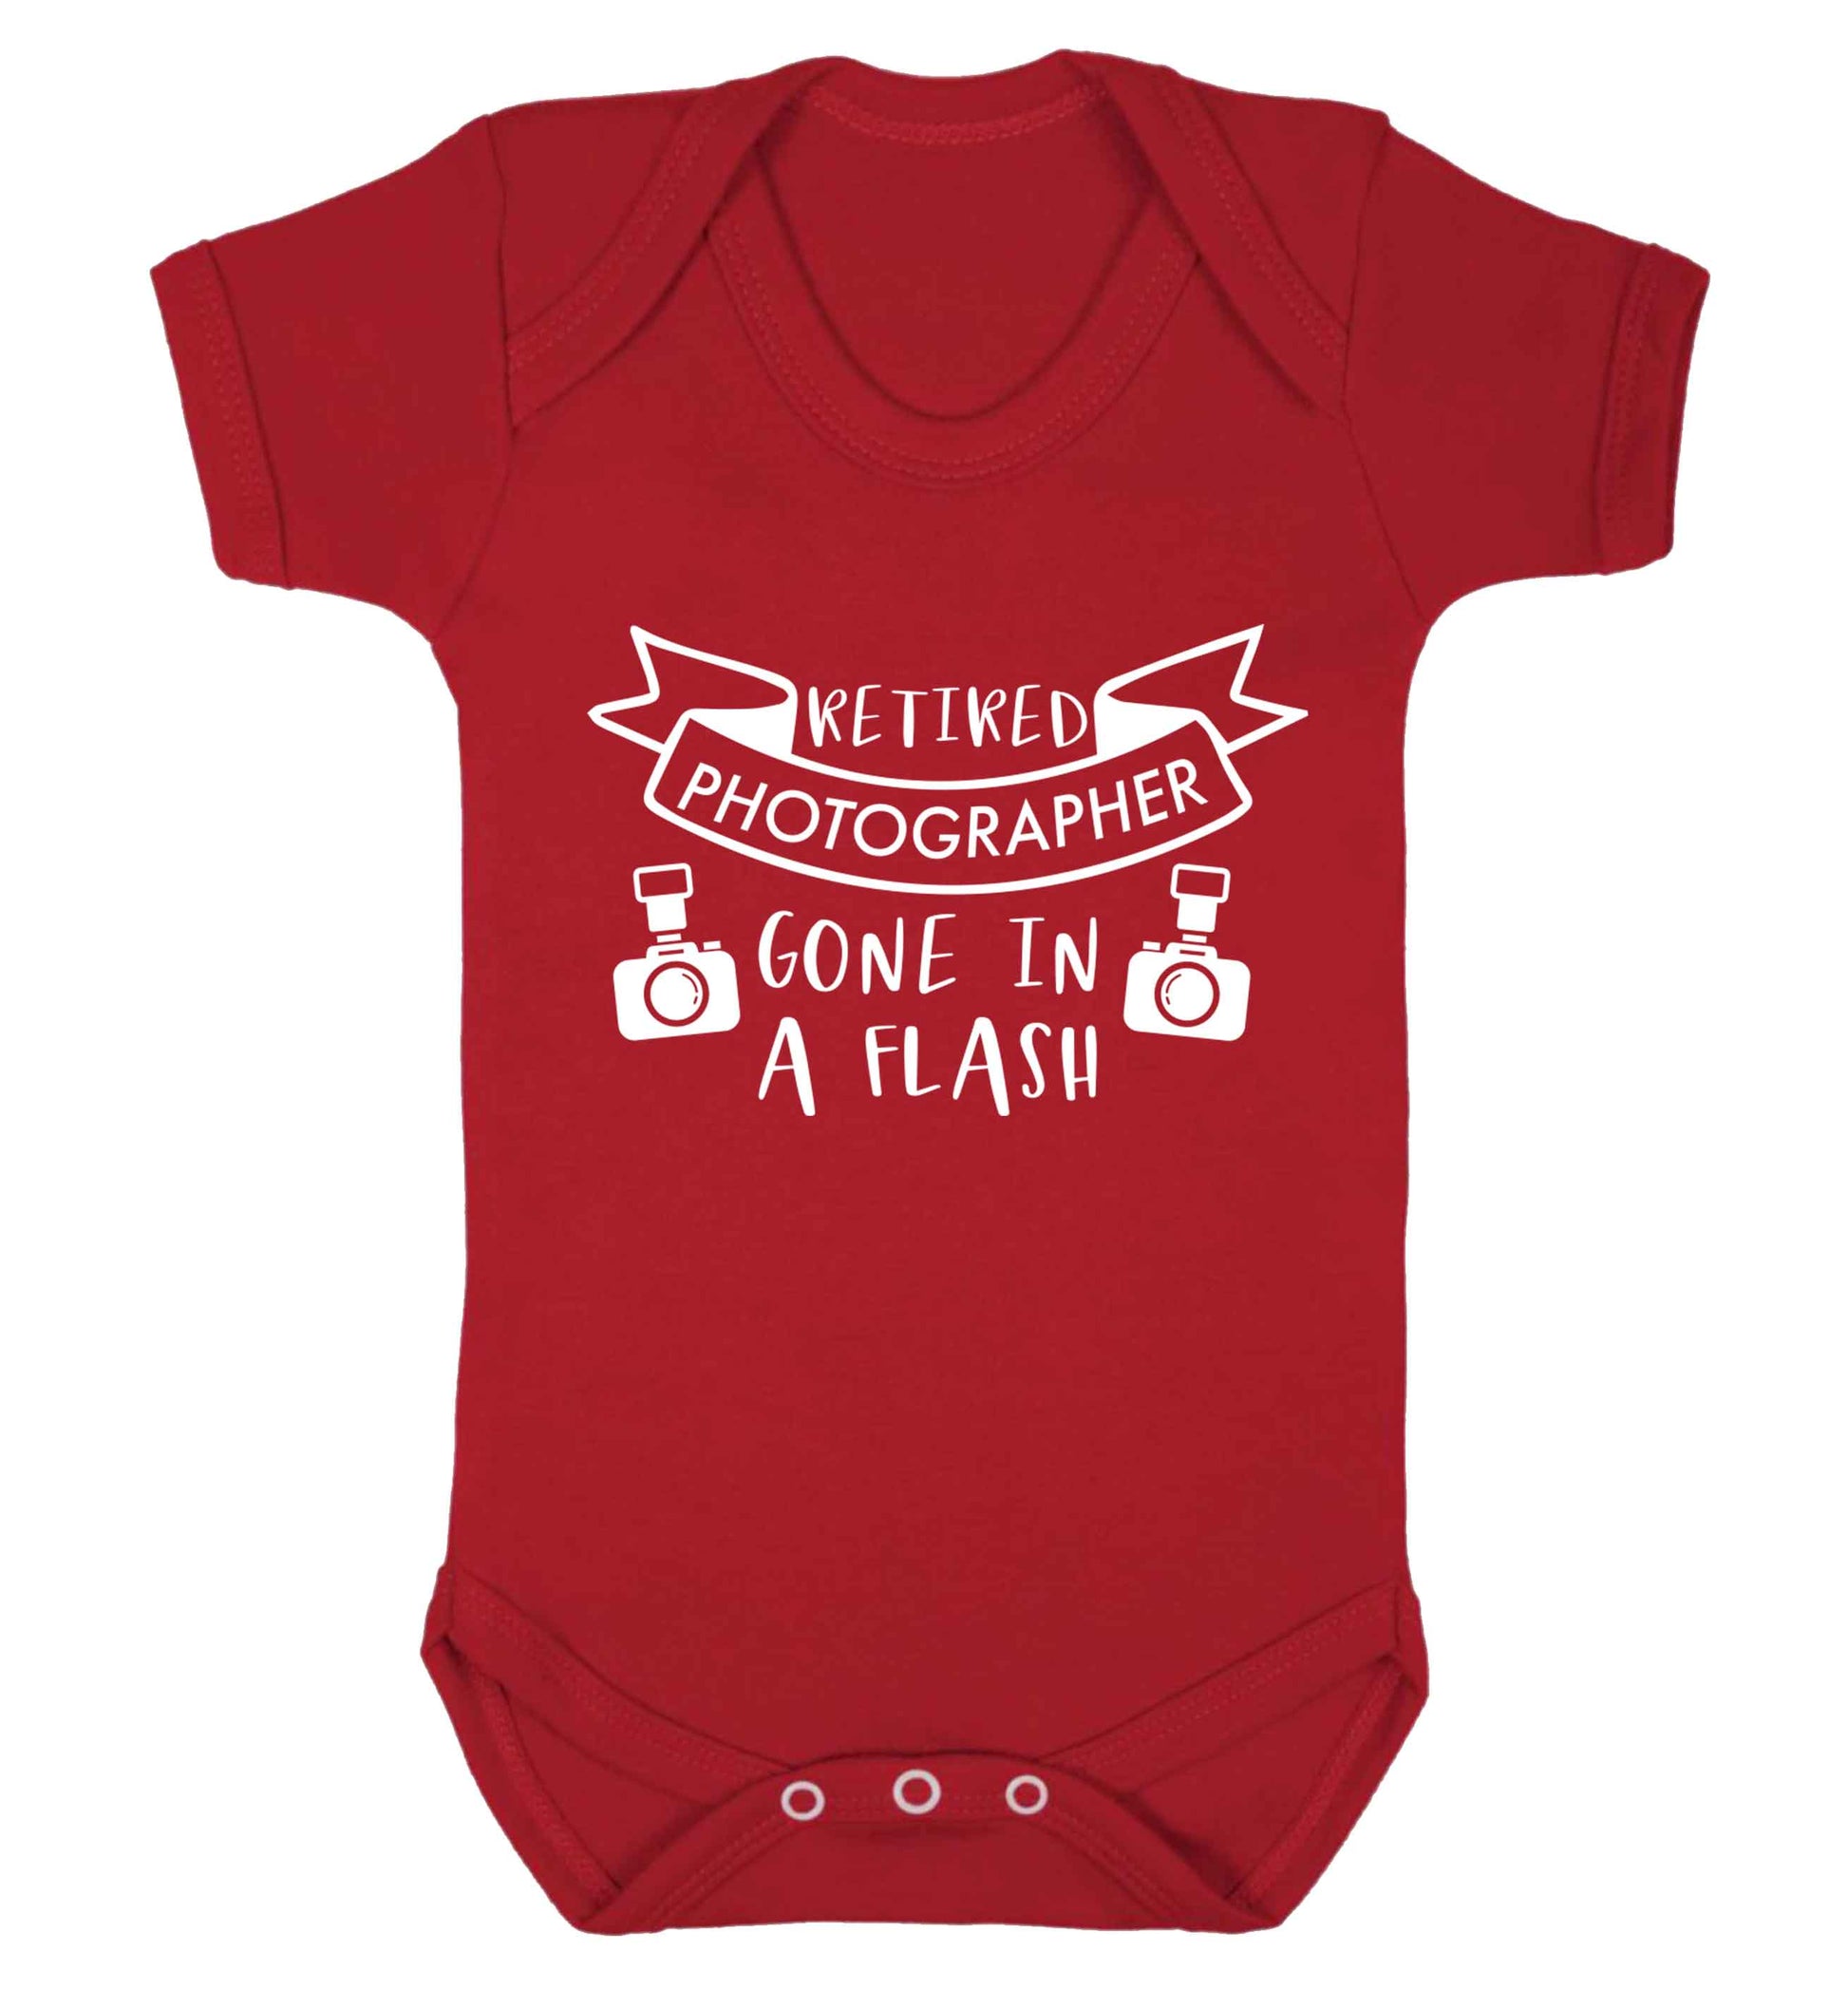 Retired photographer gone in a flash Baby Vest red 18-24 months